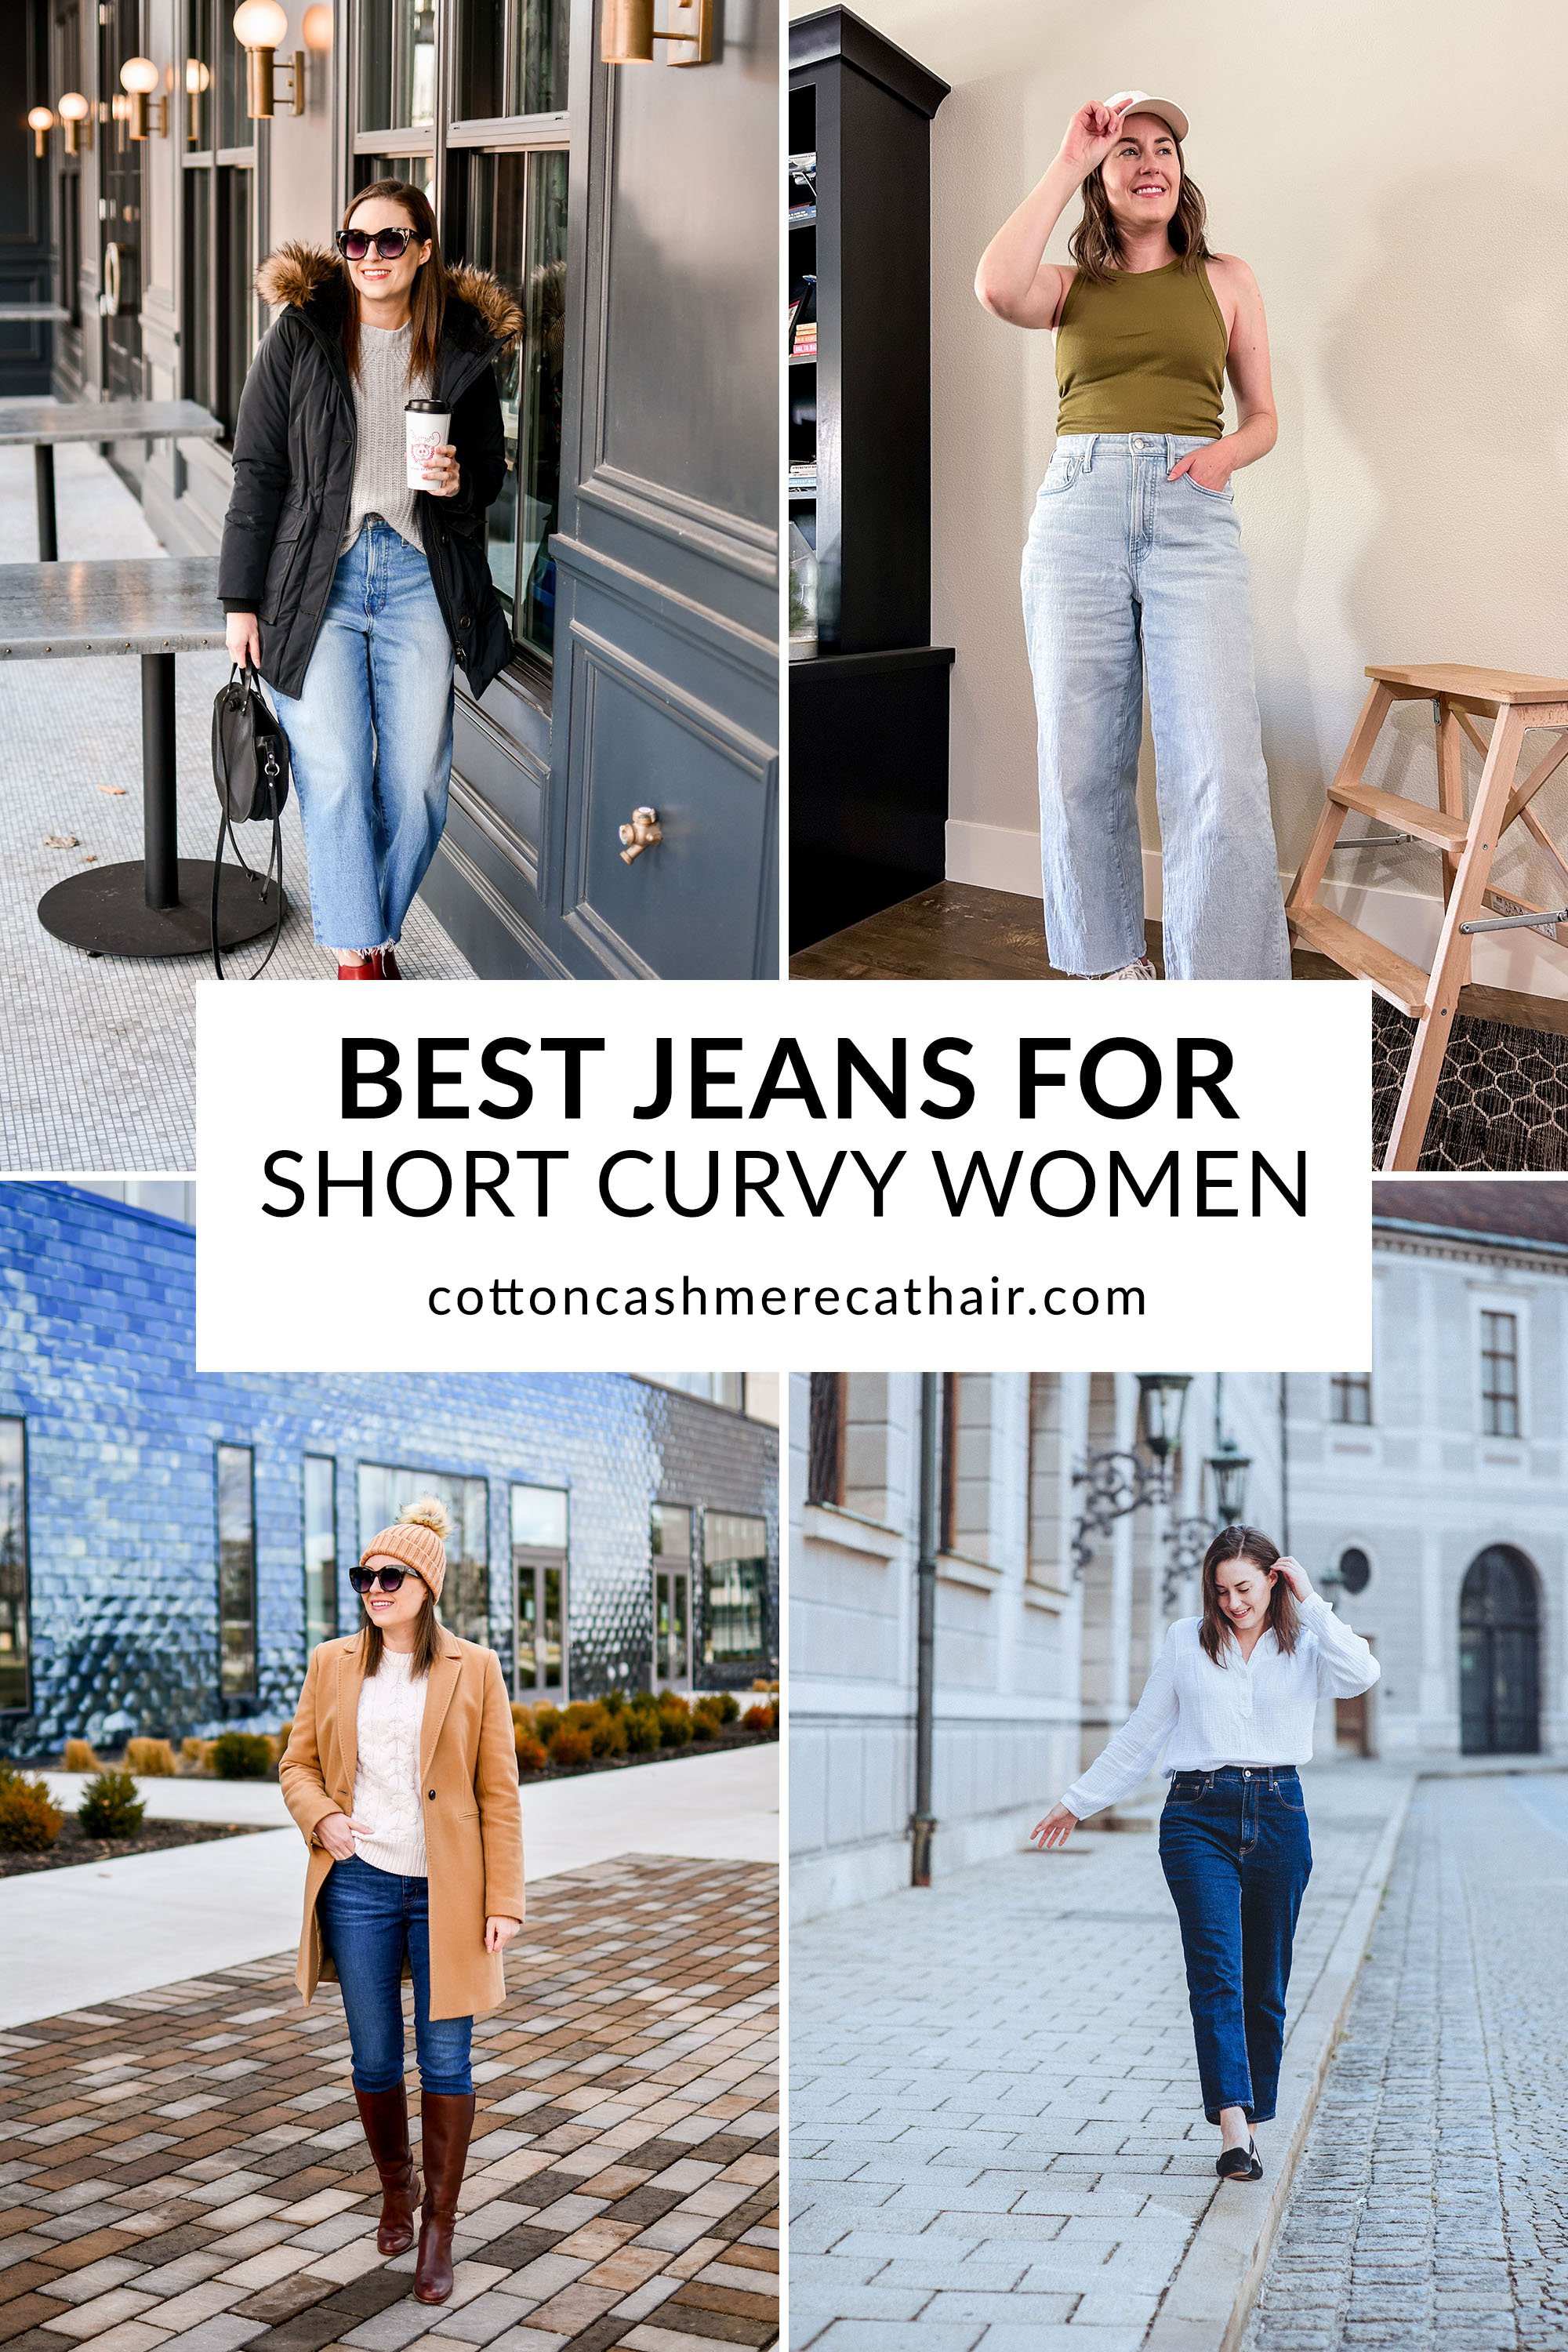 A Guide to Wearing Jeans for Petites - 5 Styling Do's and Don'ts